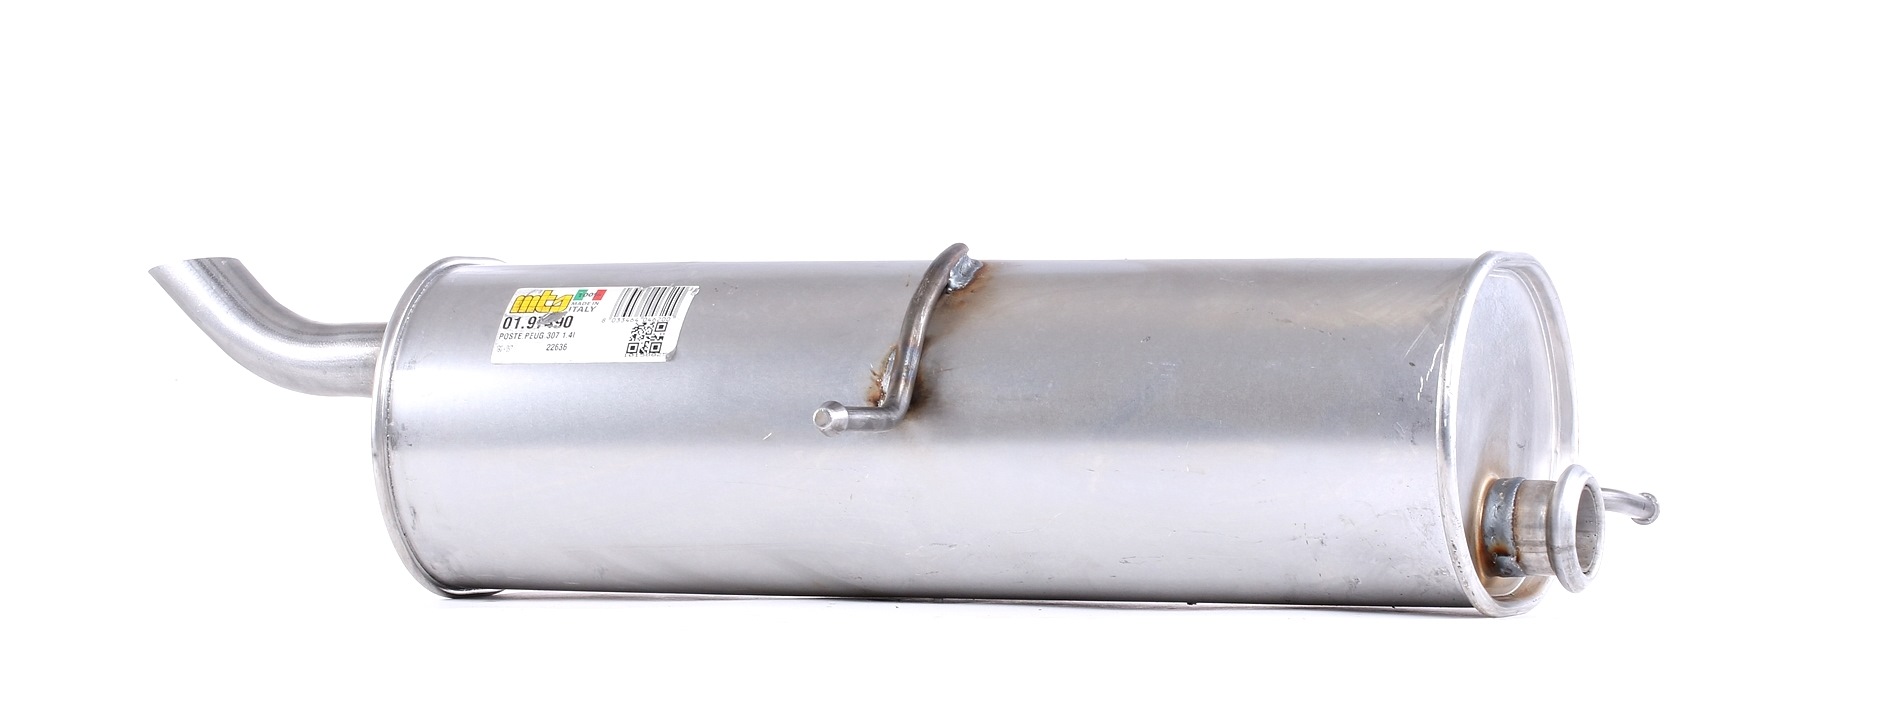 MTS Exhaust back box universal and sports 307 SW Box Body / Estate (3E_, 3H_) new 01.97490